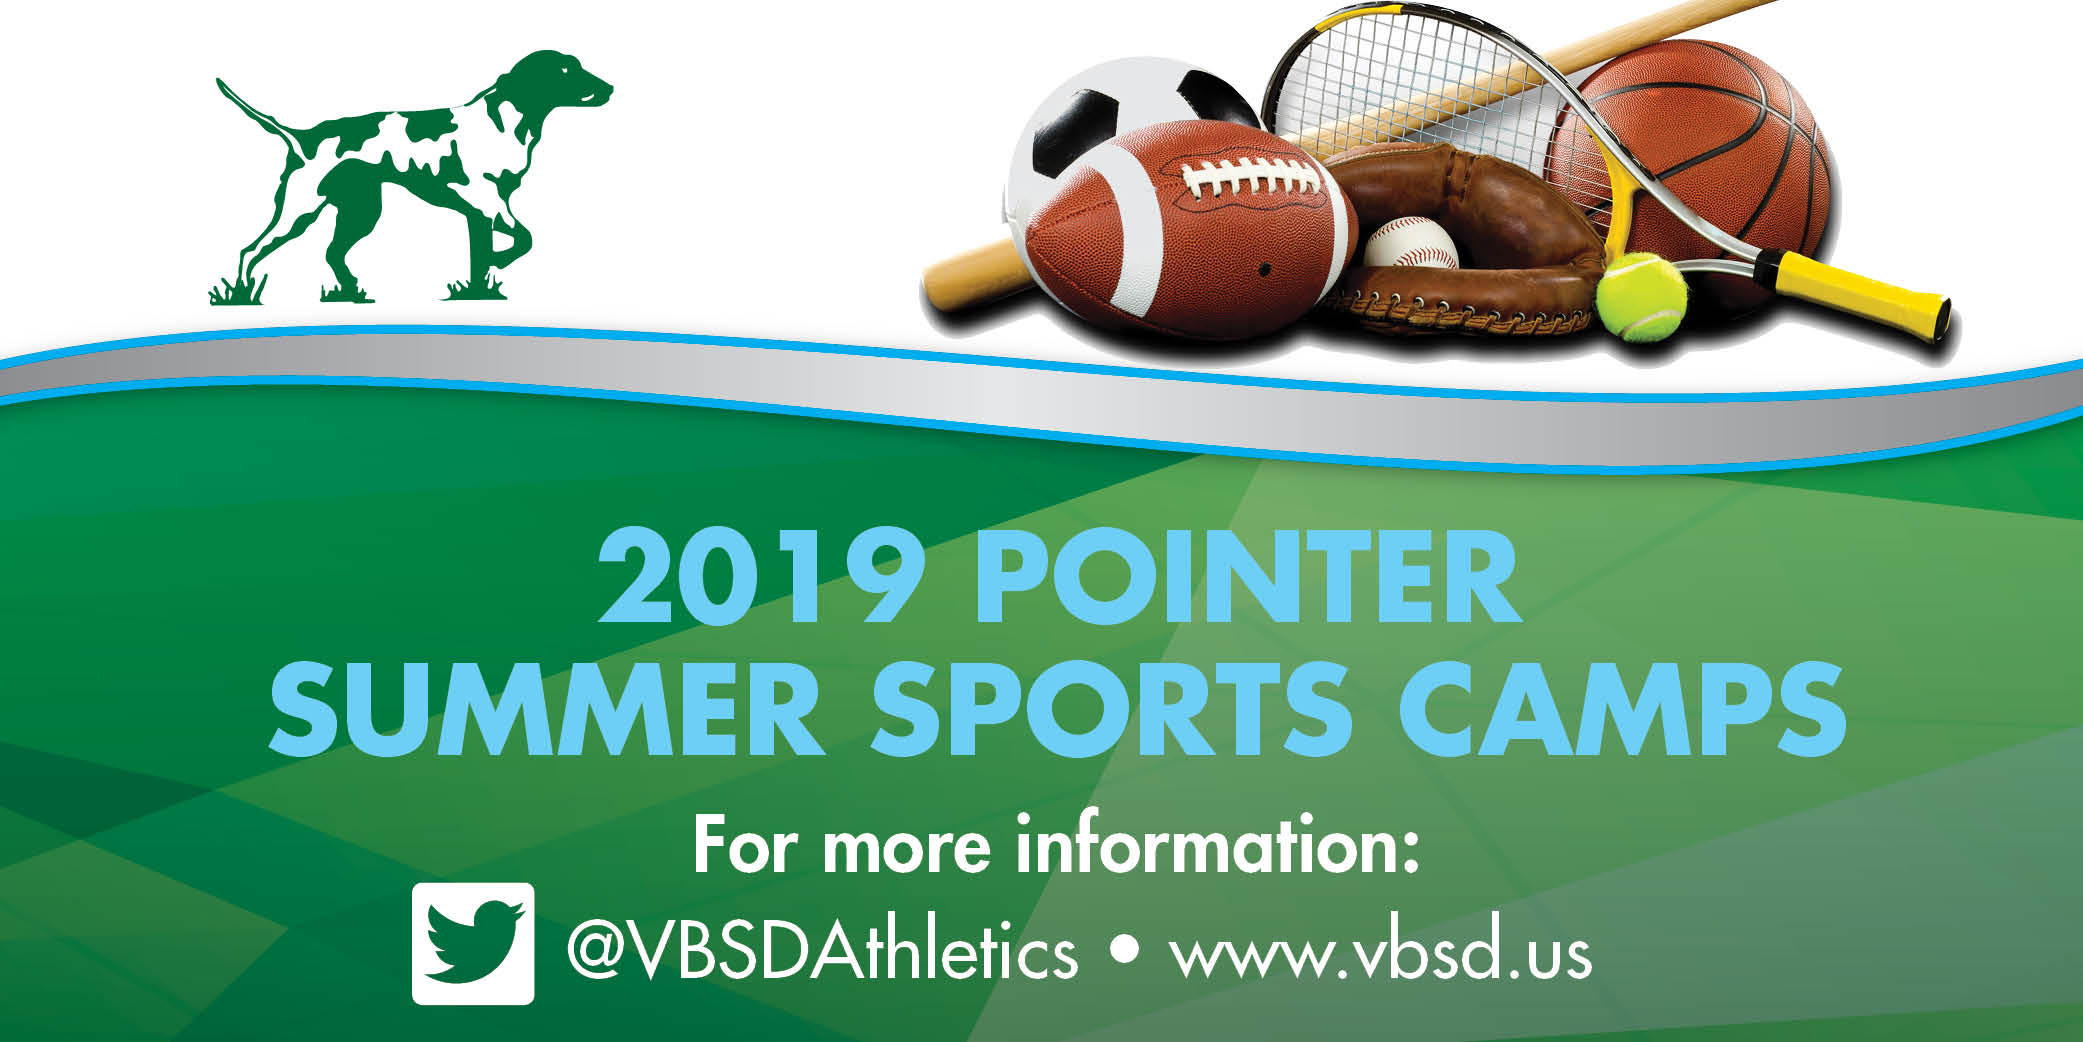 Sign-up today for Pointer Summer Sports Camps! 